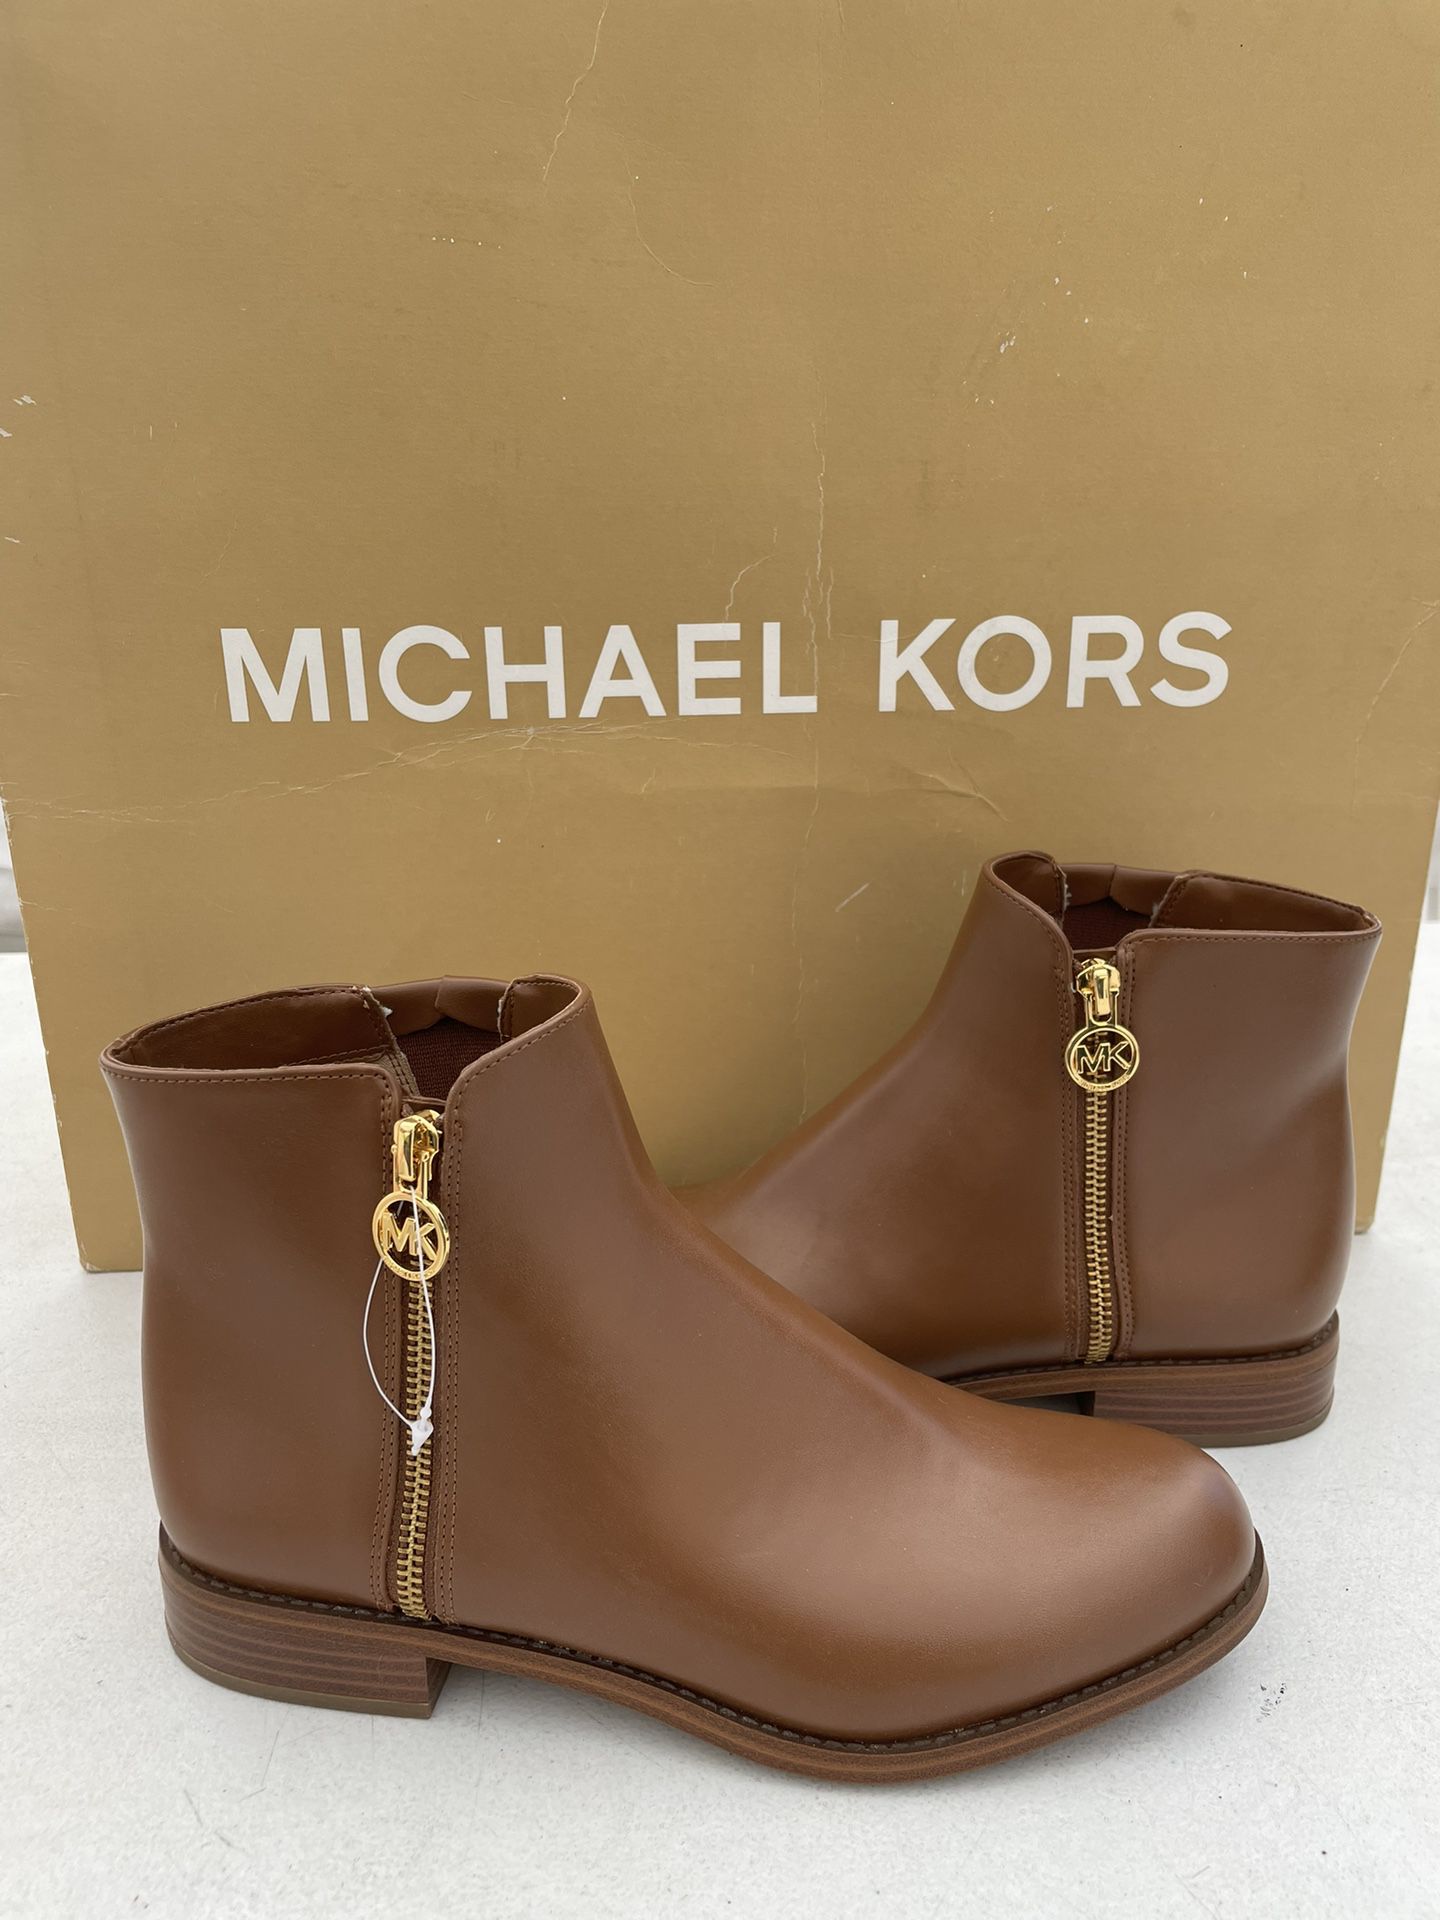  Michael Kors heel ankle boots- Women's - Black/Brown size 8 serious inquiries only  Pick up location in the city of picó Rivera 